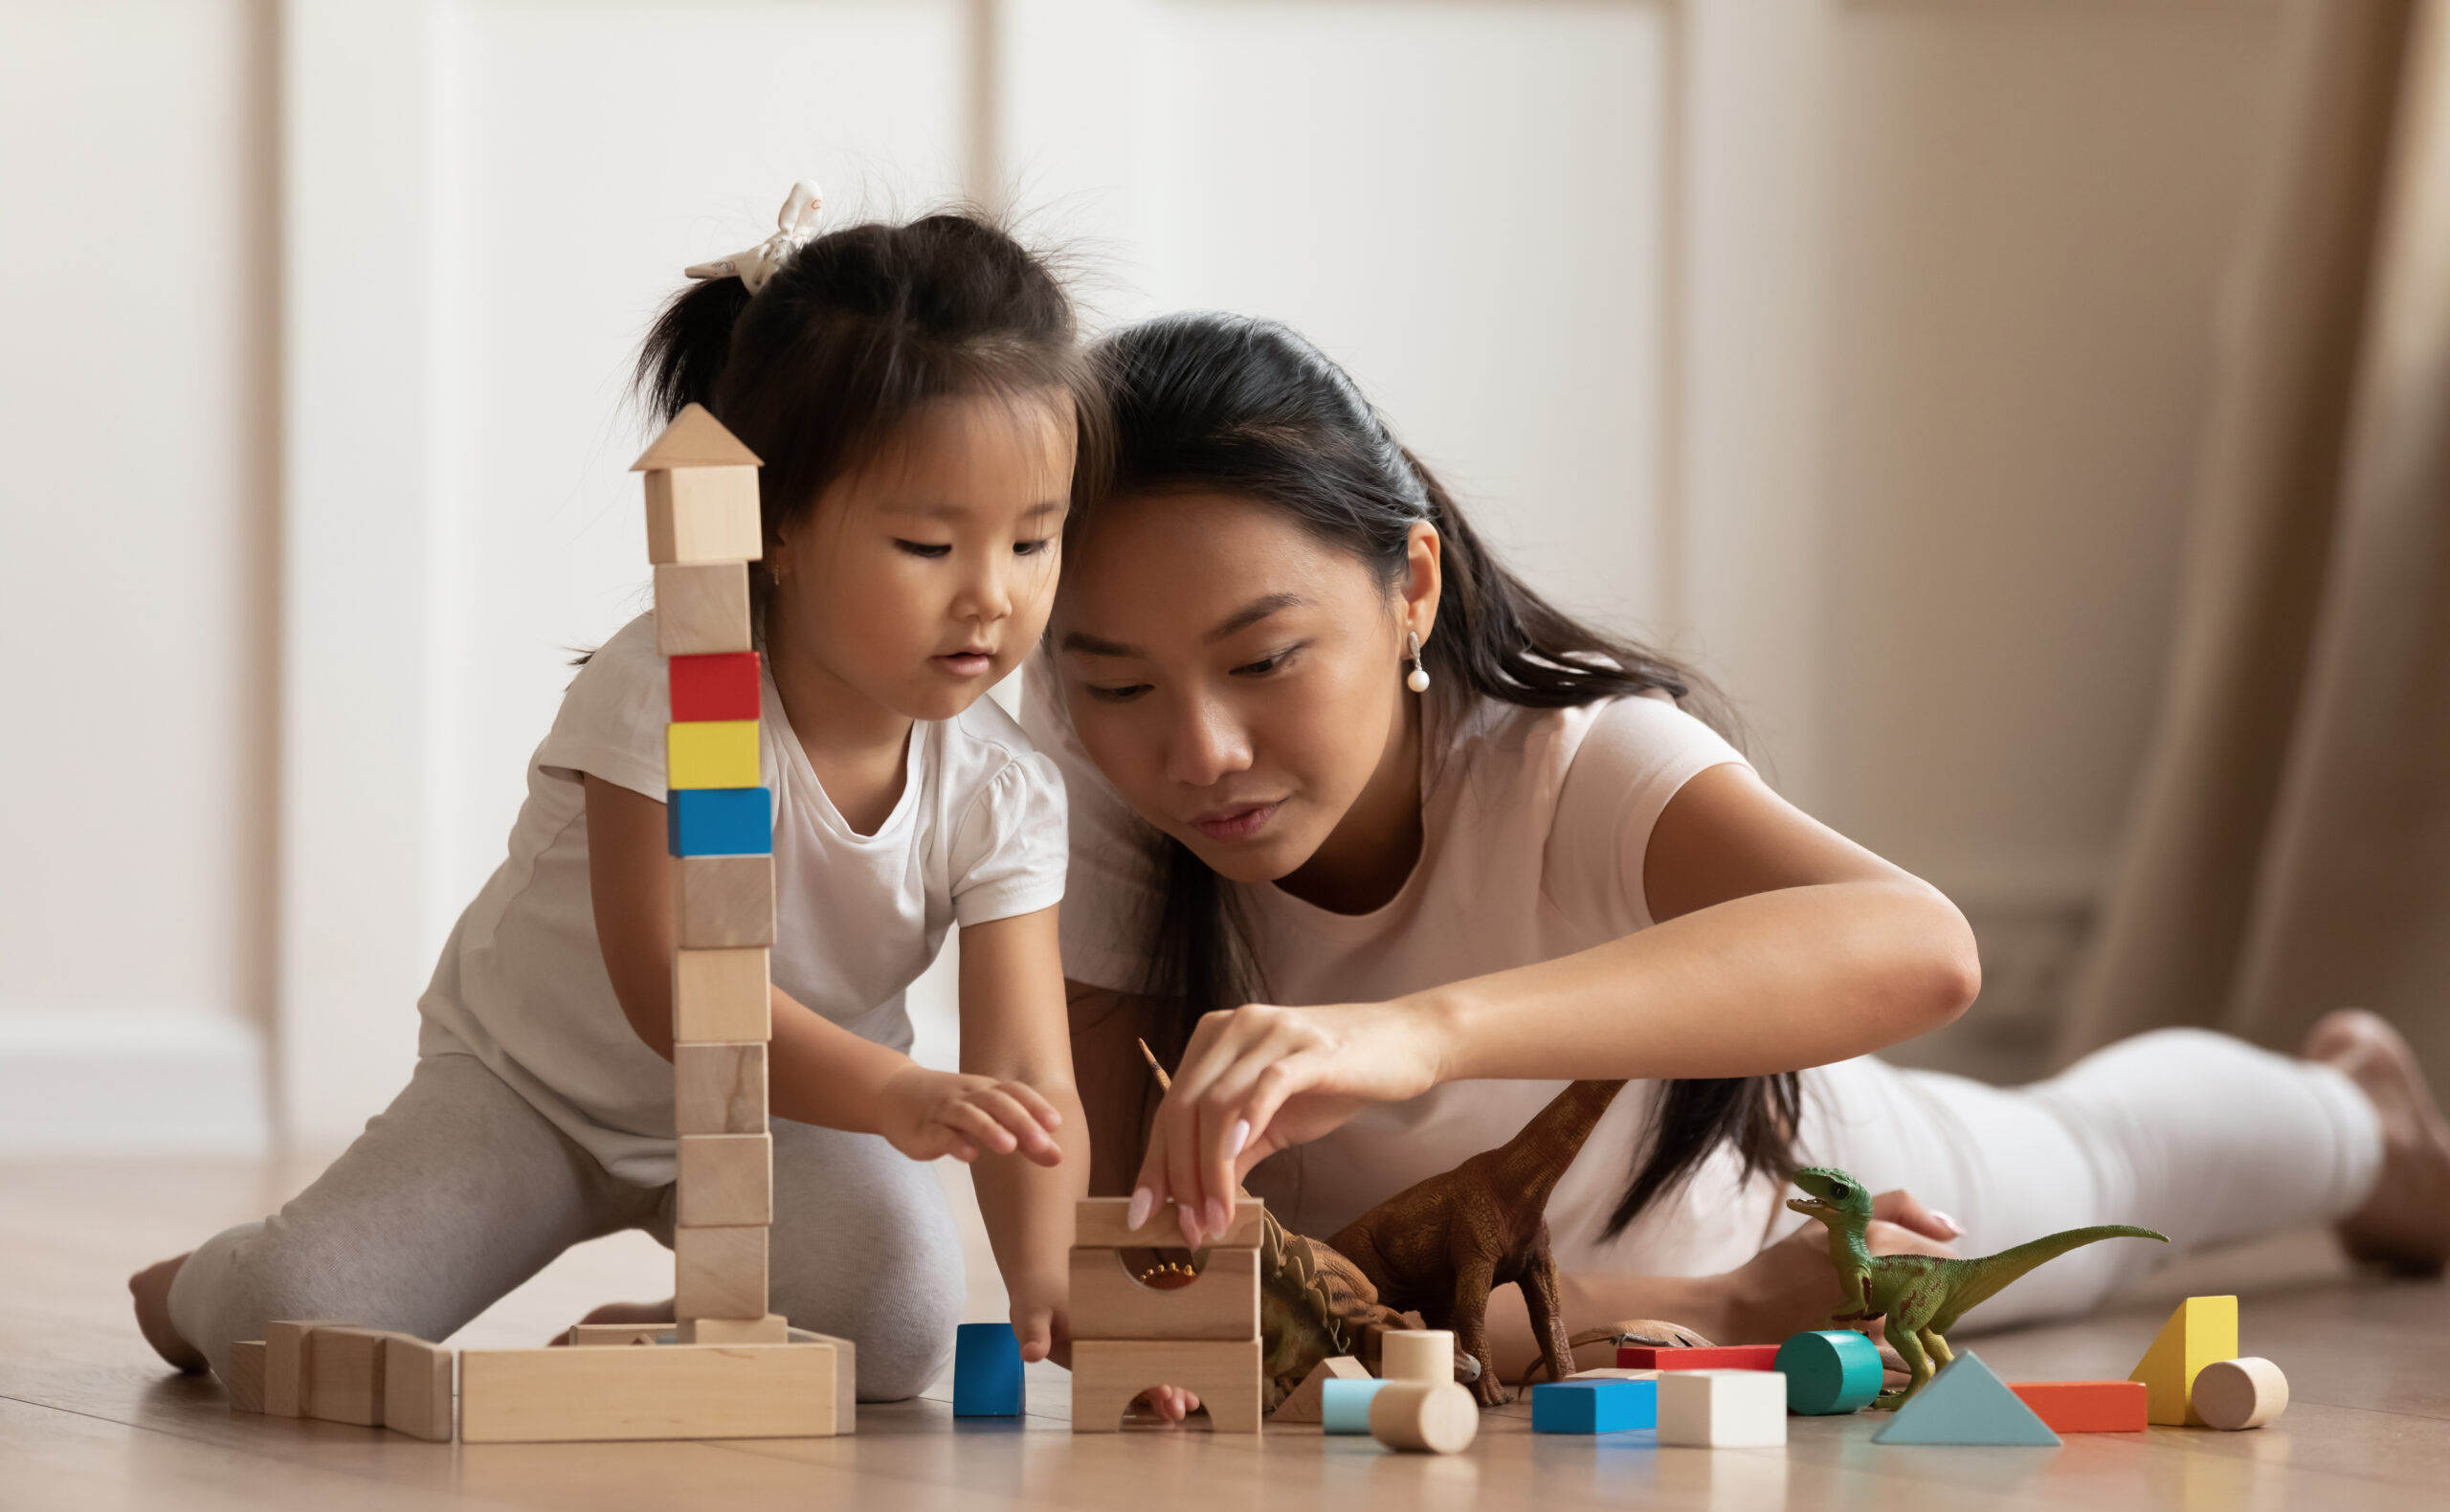 A woman and child playing with blocks on the floor.